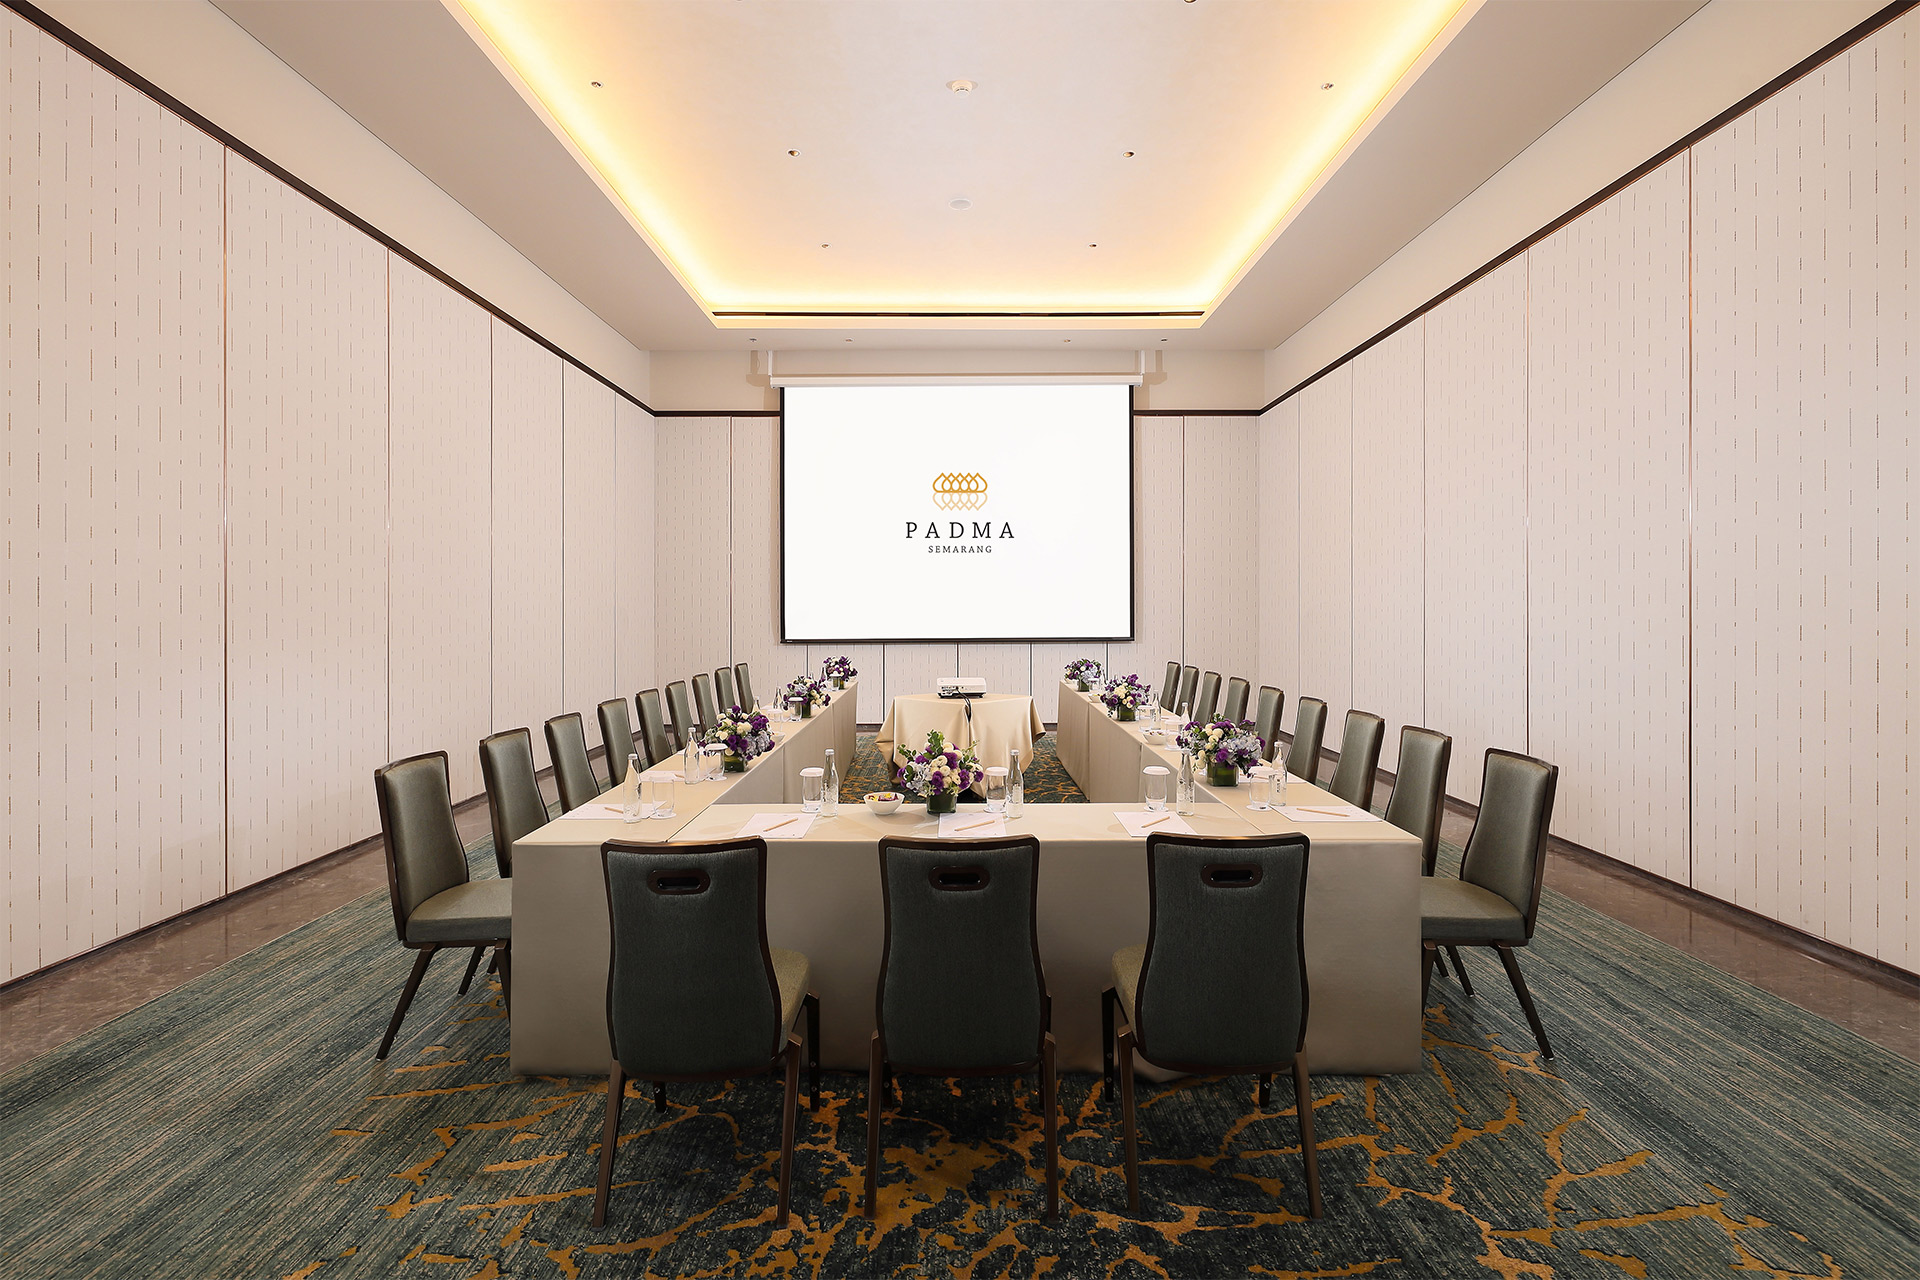 Luxurious indoor venue for meeting and private event with classroom set up